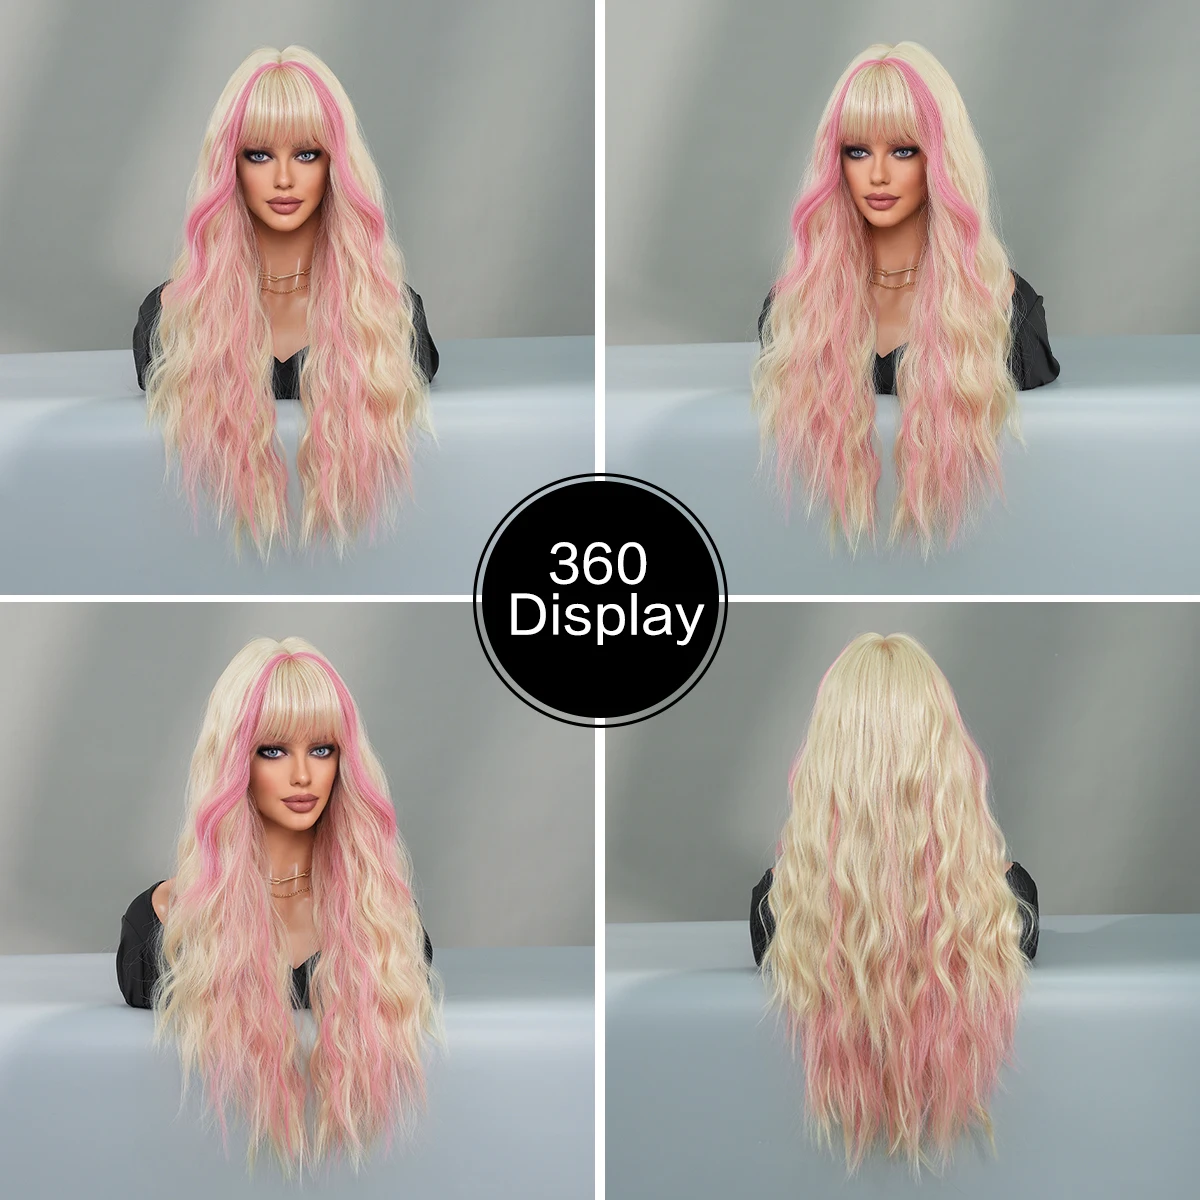 NAMM Long Wavy Blonde Wig for Women Daily Party Highlight dyeing Pink Synthetic Hair Wigs With bangs wig Halloween Cosplay